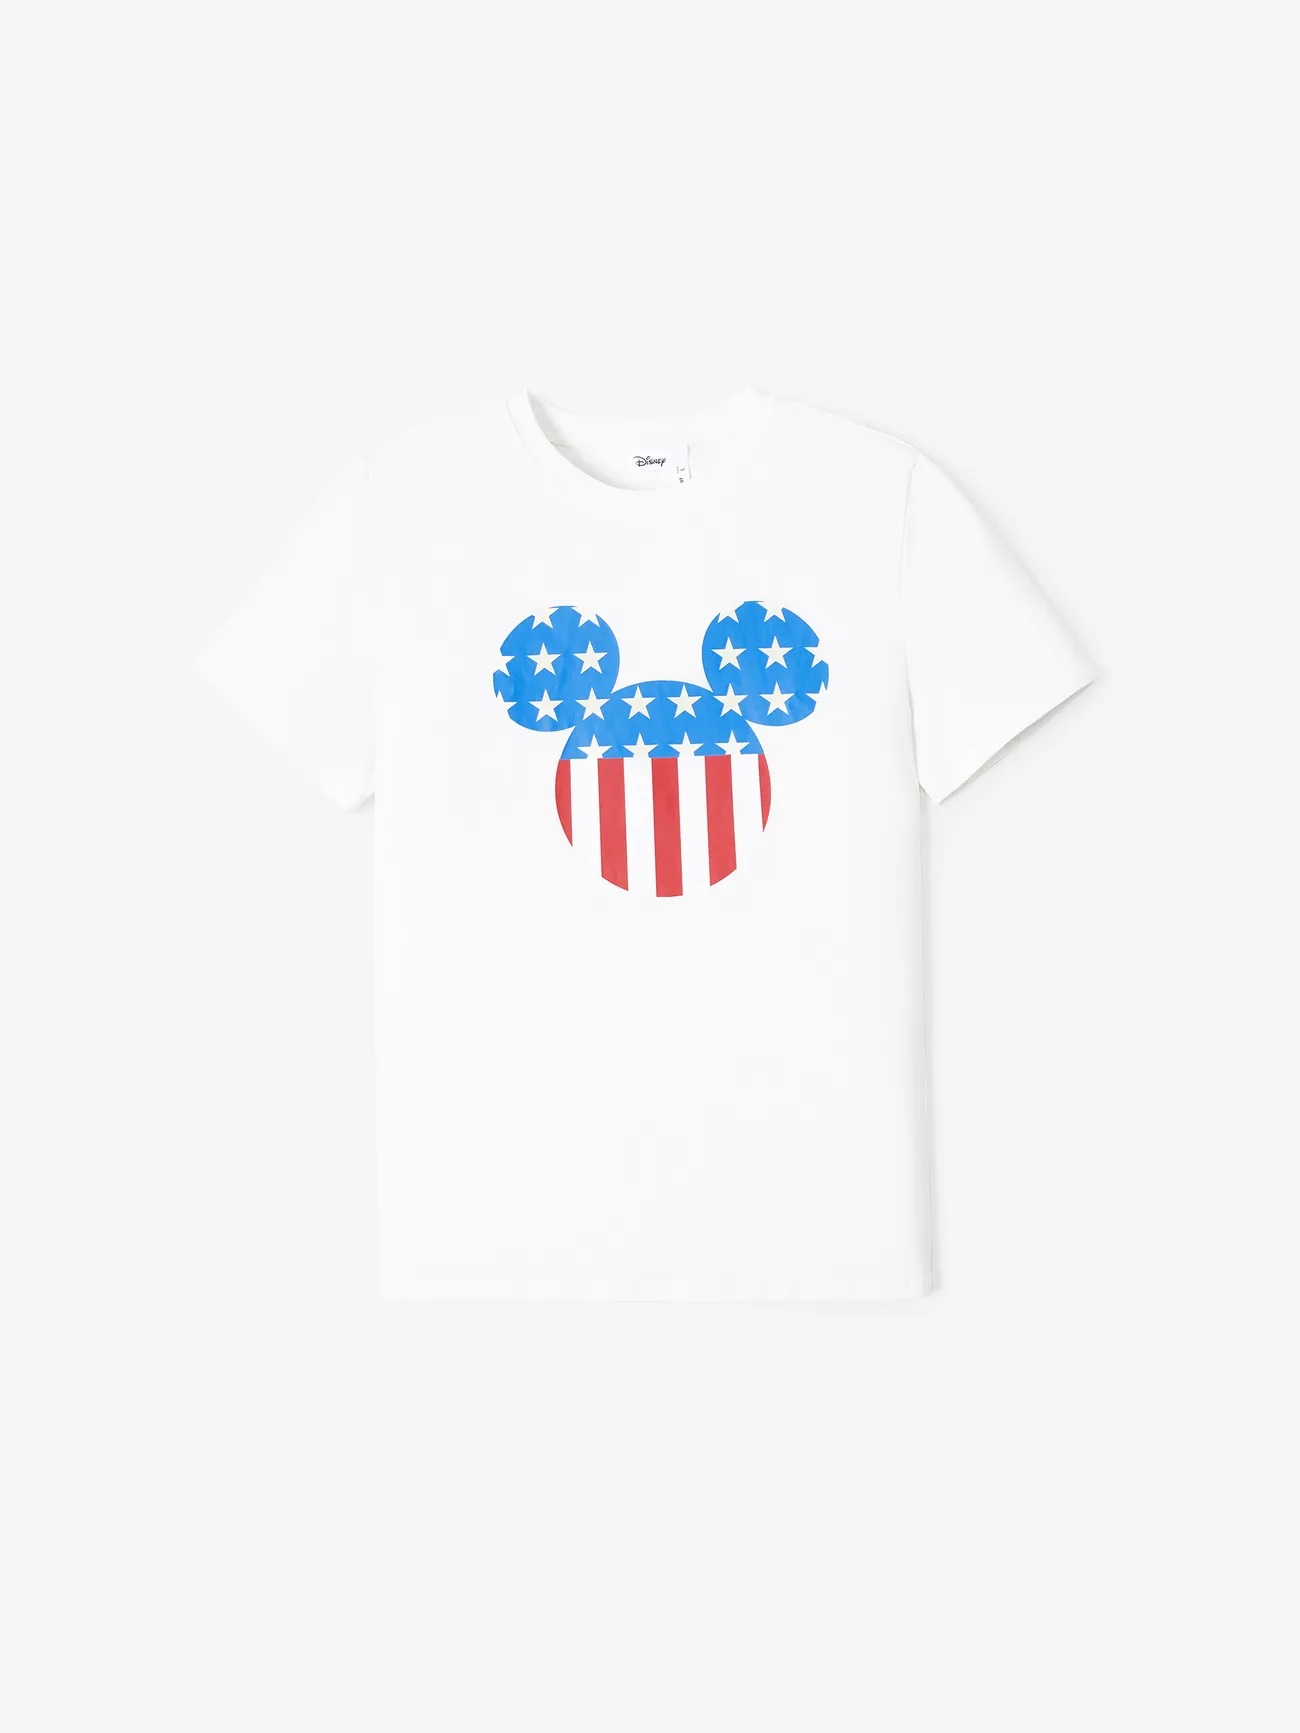 Disney Mickey and Friends Look Familial Fête Nationale Manches courtes Tenues de famille assorties Hauts Blanc big image 1